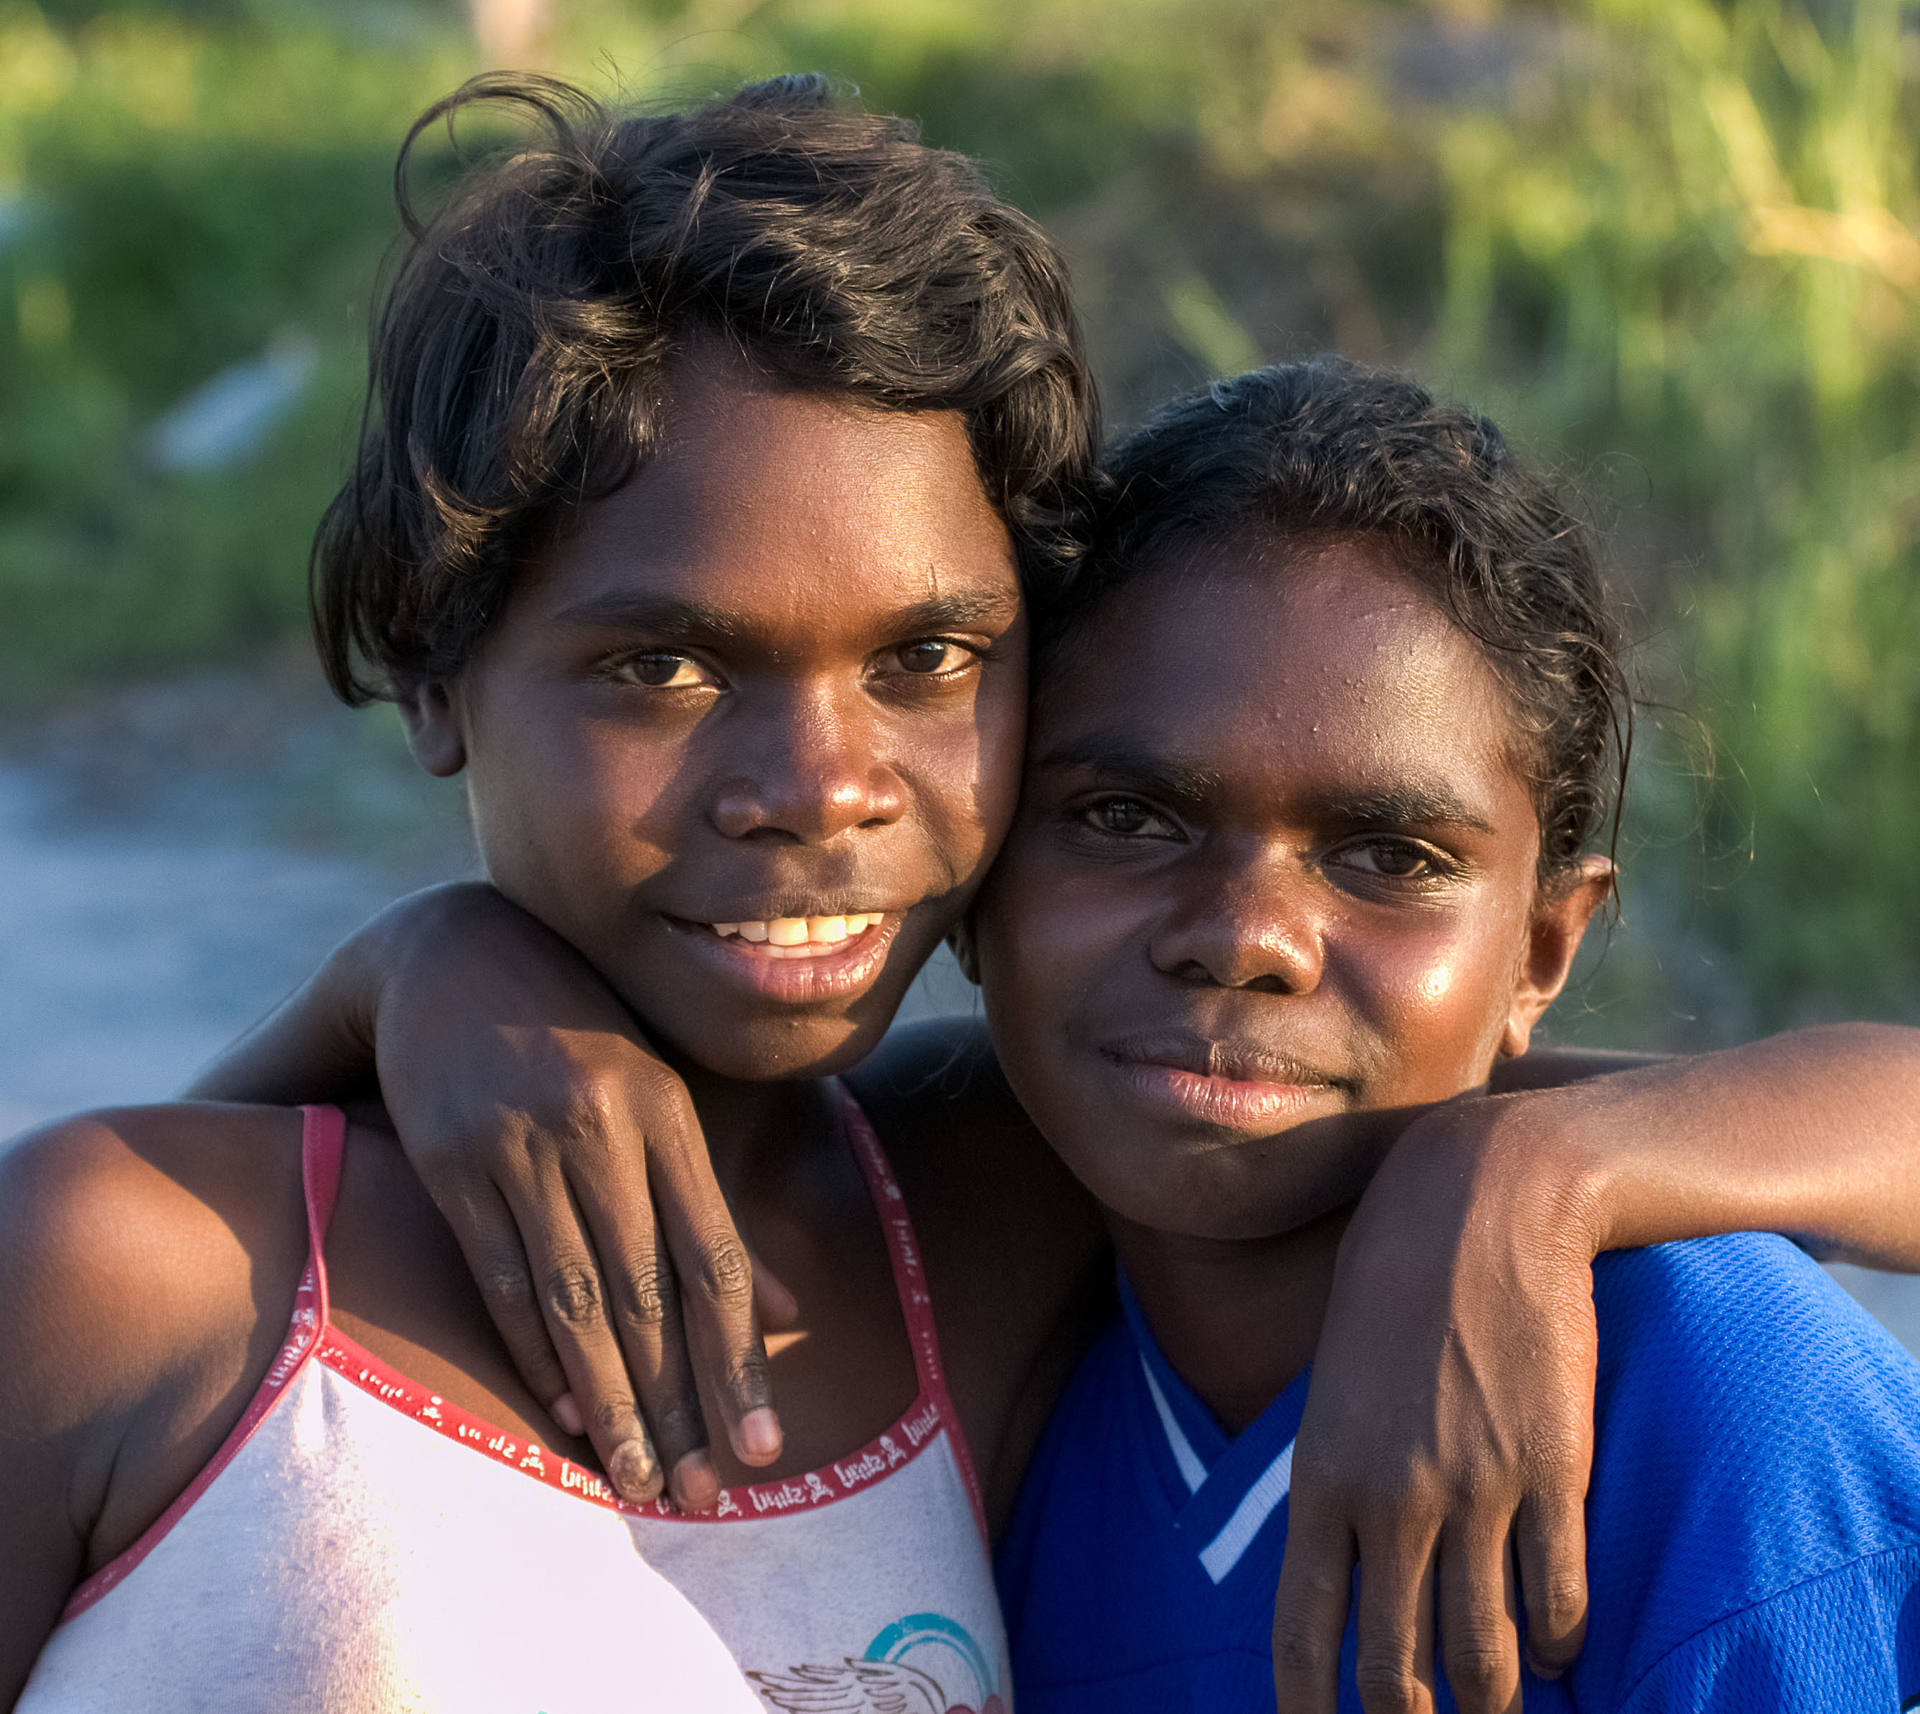 National network to significantly improve health outcomes for Indigenous Australians